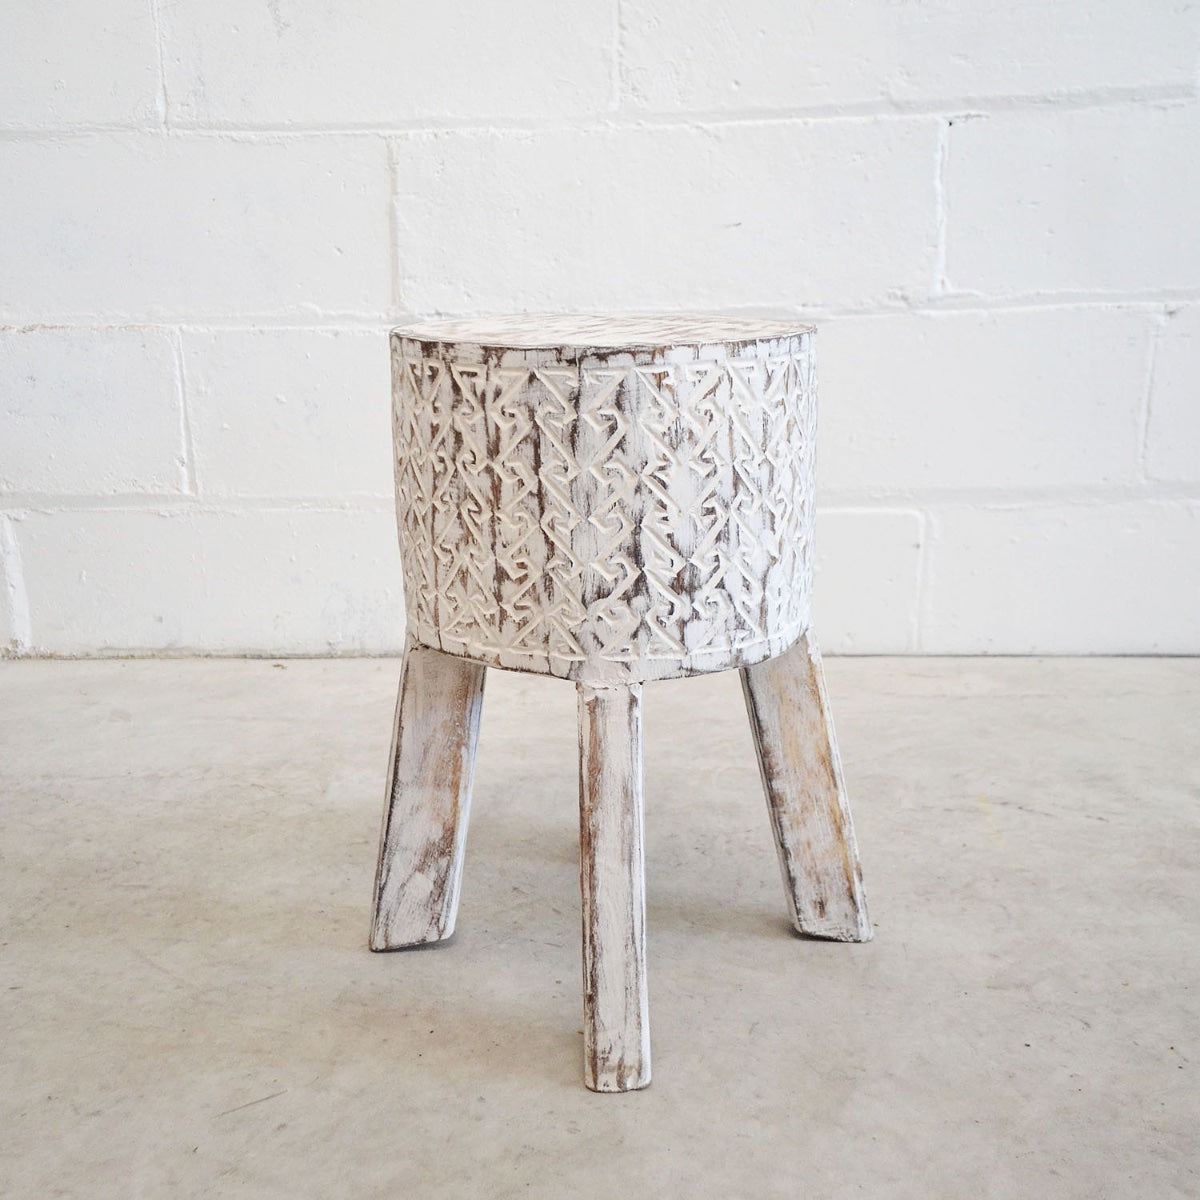 Tribal Carved Palm Stool With Legs - White Wash | Pre Order